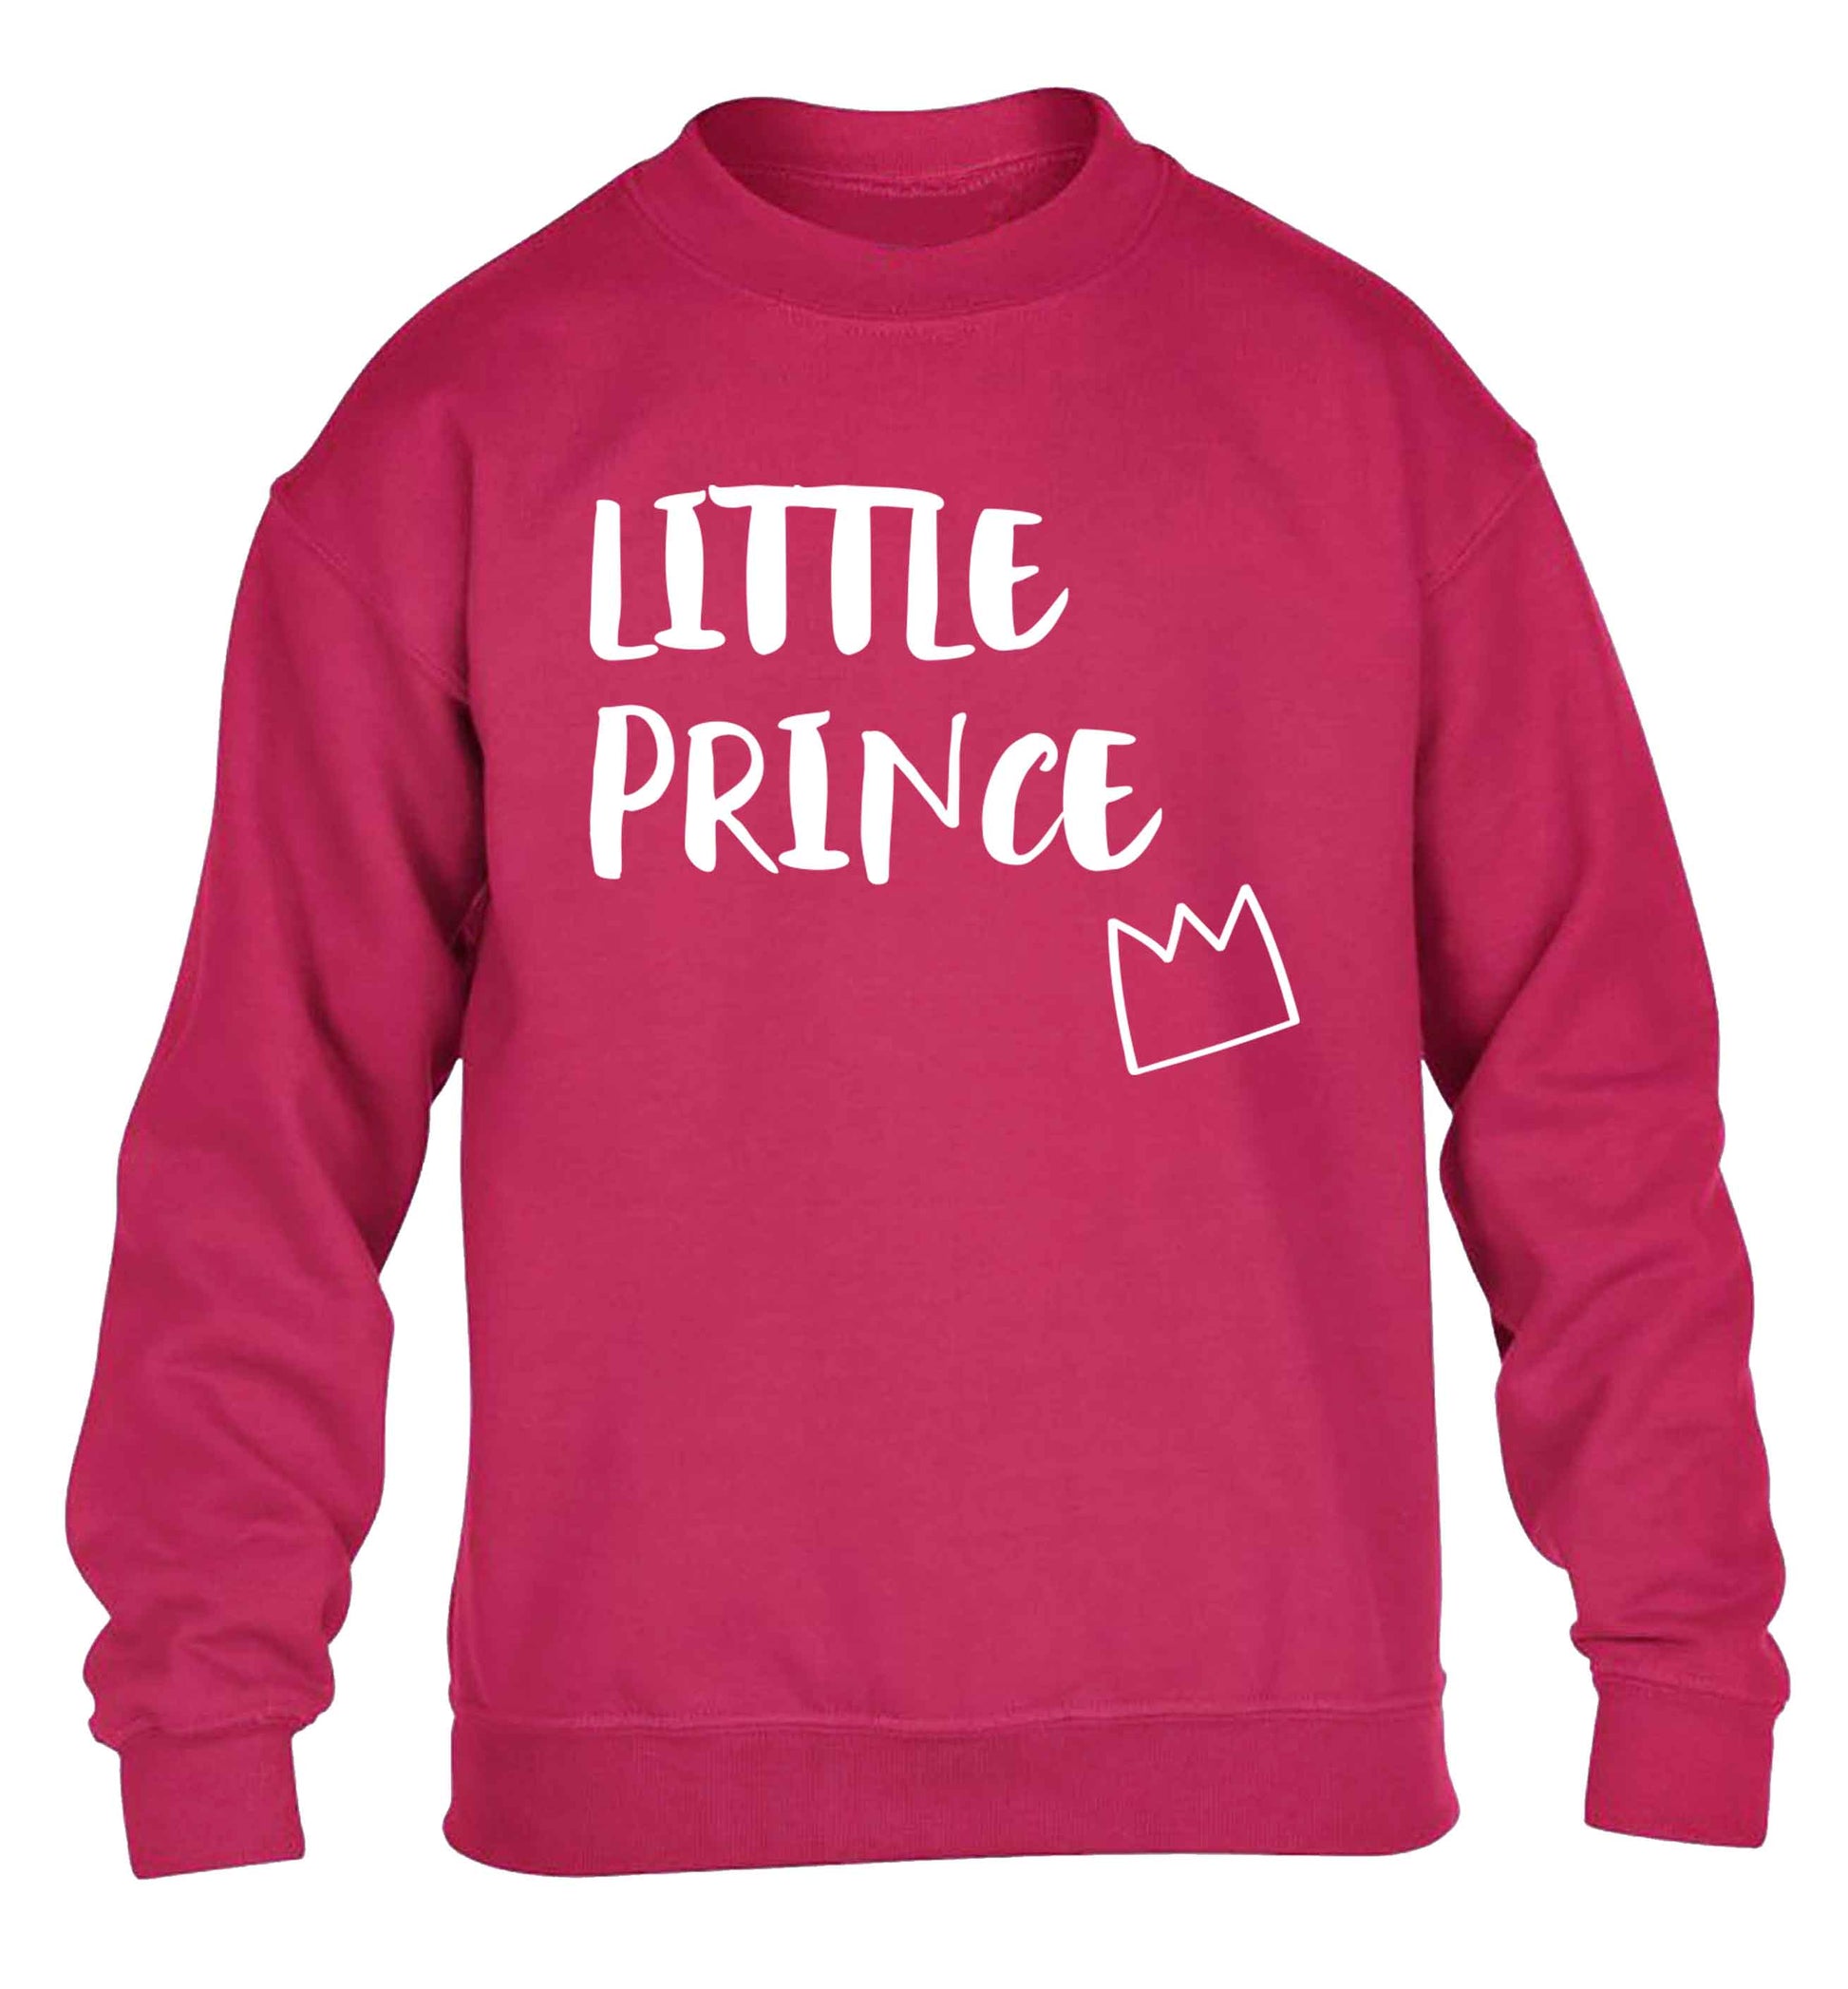 Little prince children's pink sweater 12-13 Years